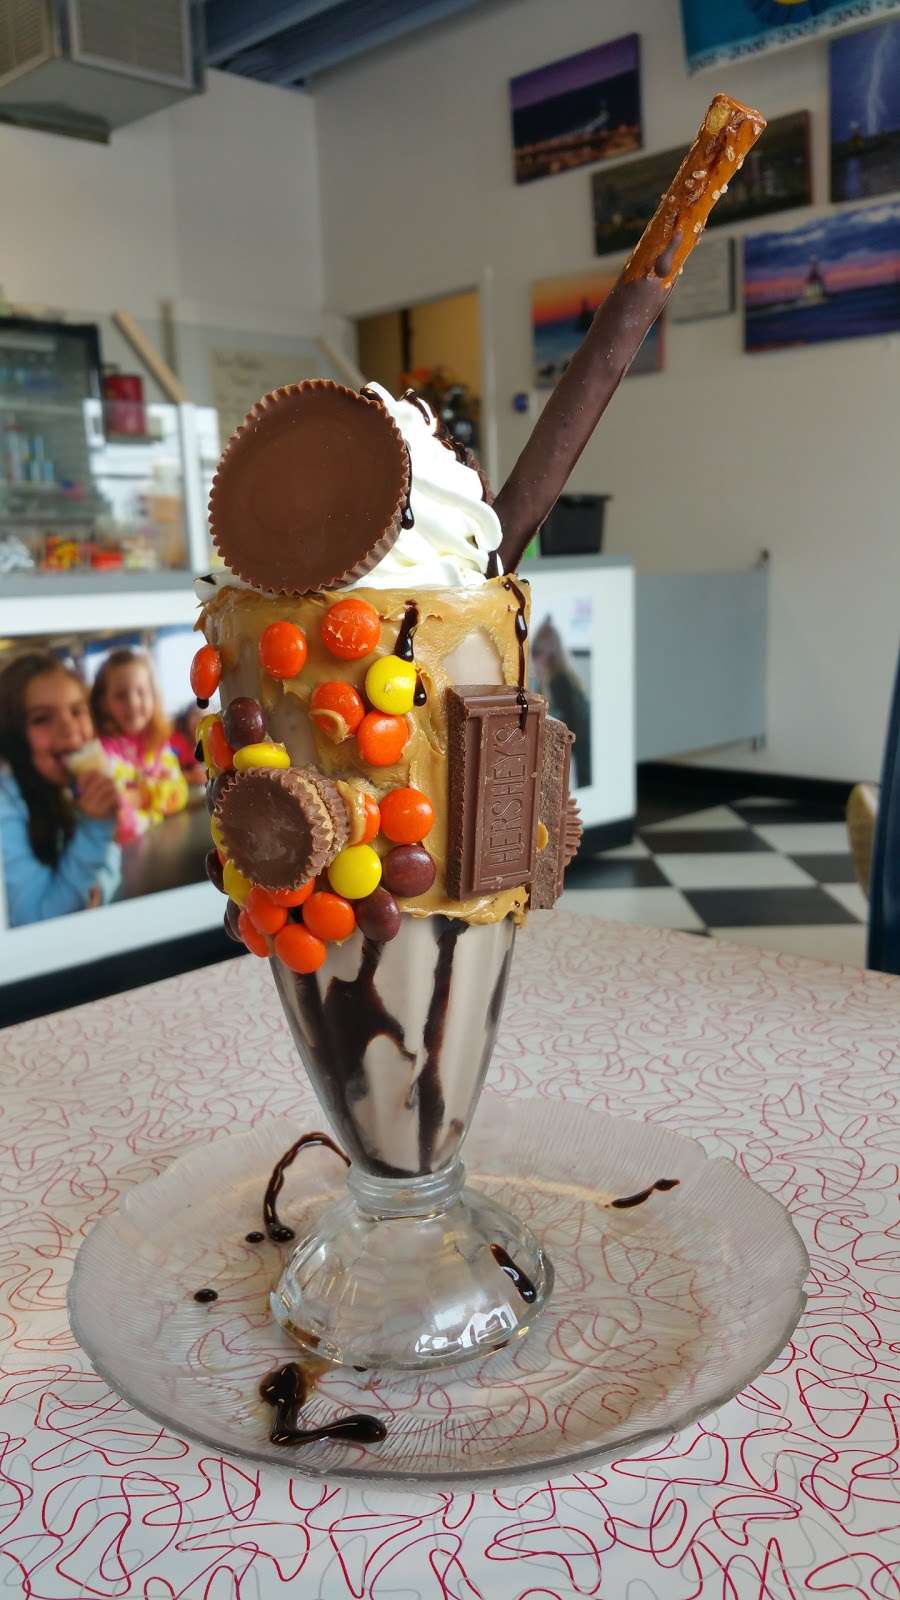 Bubbles Ice Cream Parlor | 115 W Coolspring Ave, Michigan City, IN 46360 | Phone: (219) 872-1024